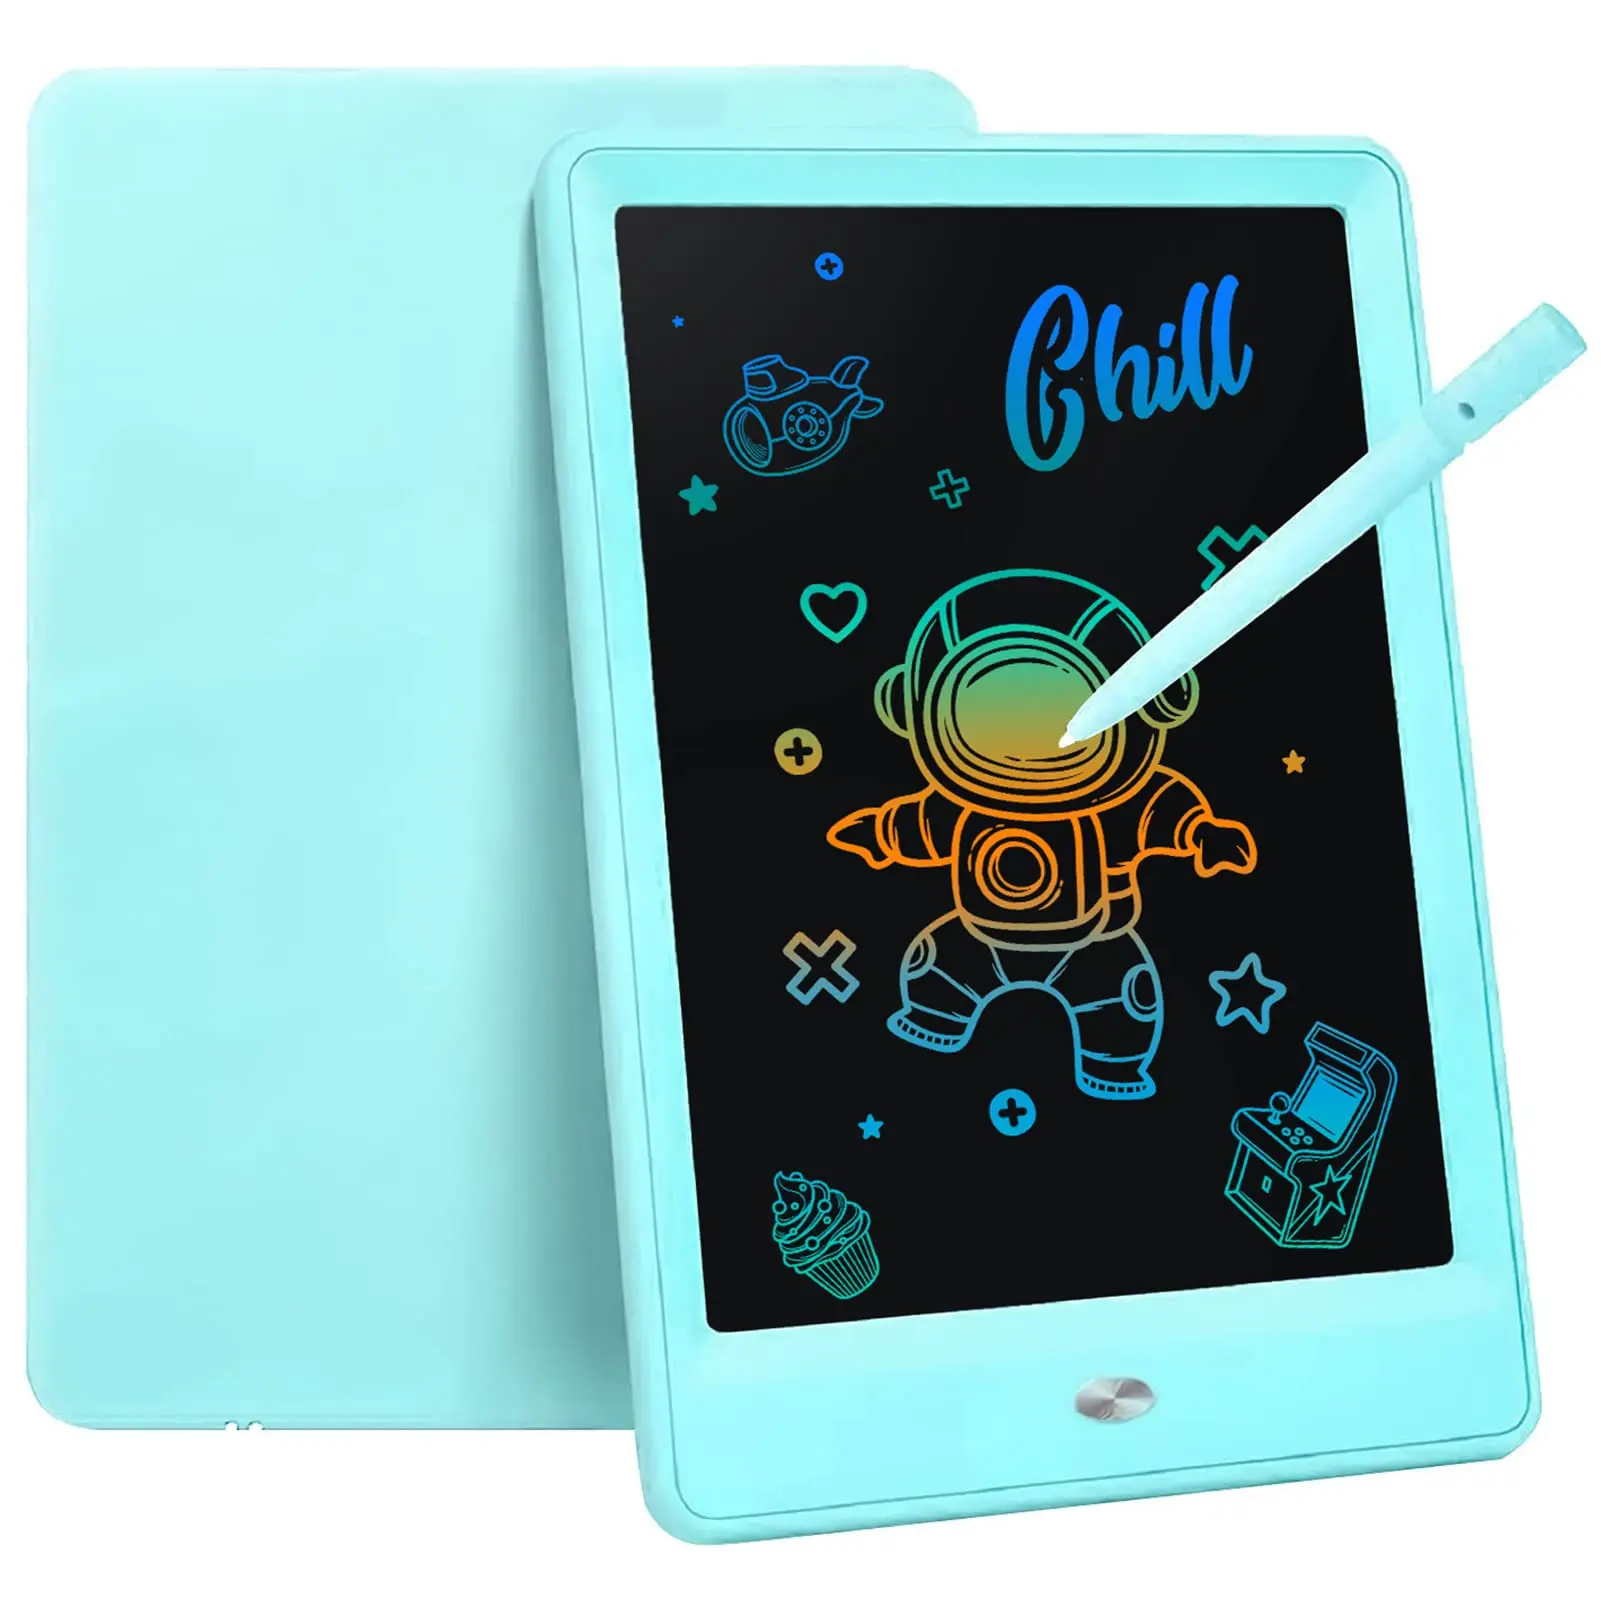 Erase Button LCD Writing Tablet,Colorful Screen Electronic Writing Board Doodle Pads Drawing Board Gifts for Kids 10inch 